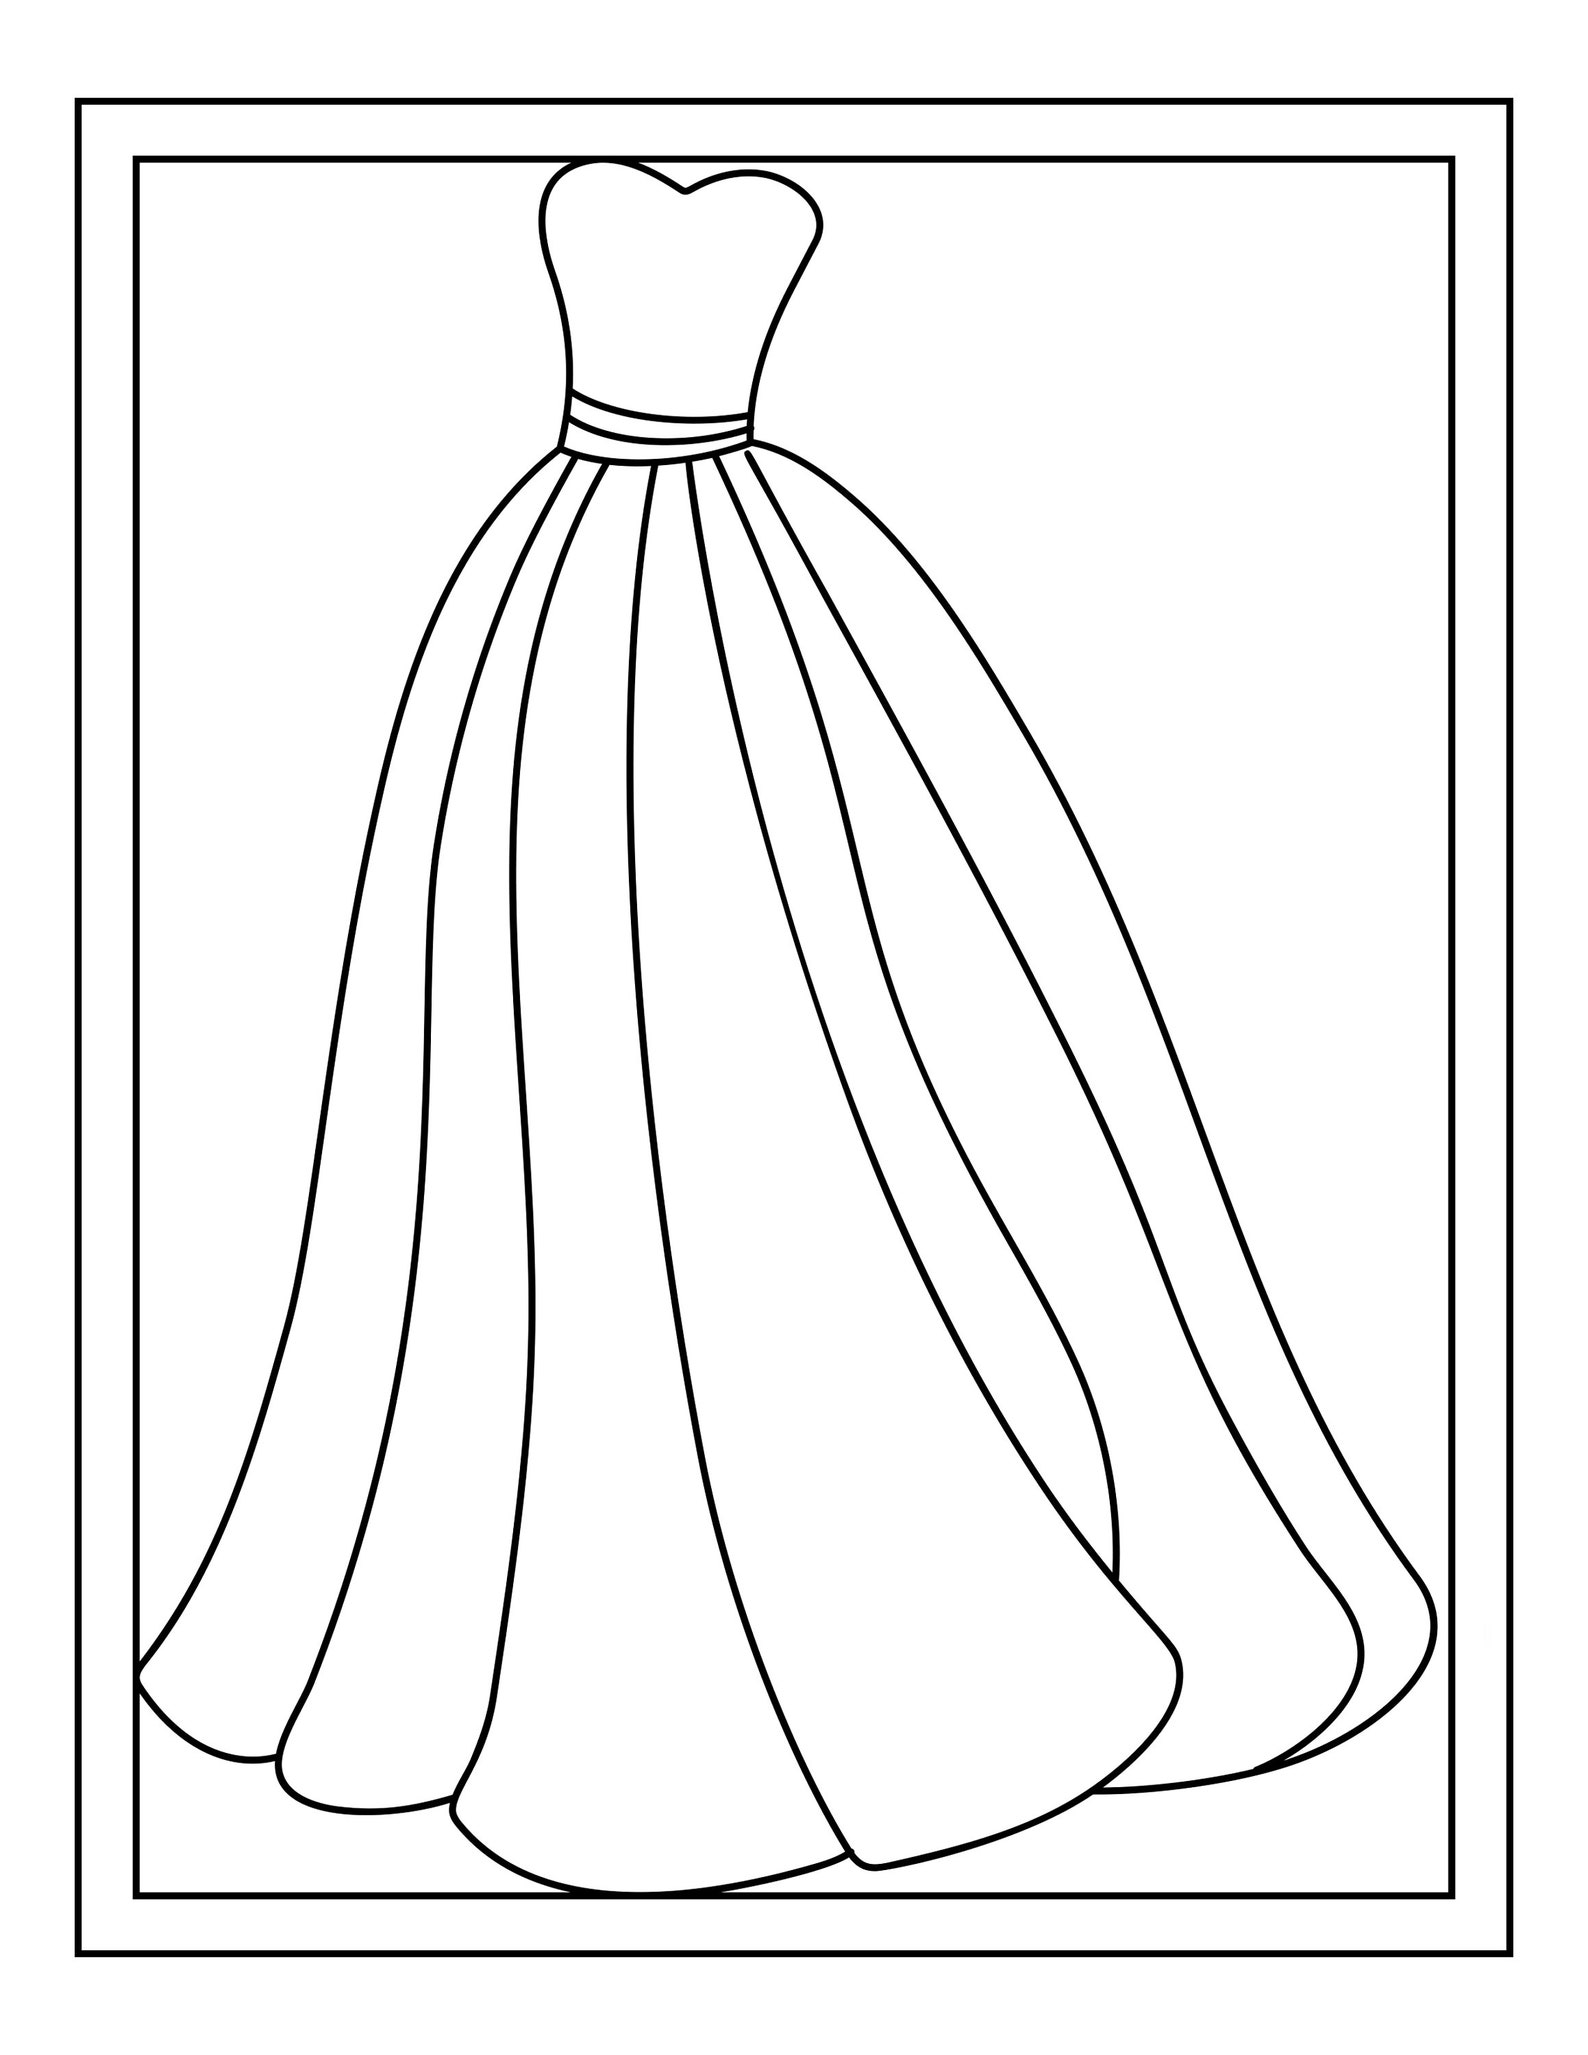 16 Princess Dress Coloring Pages for Kids // Printable | Etsy